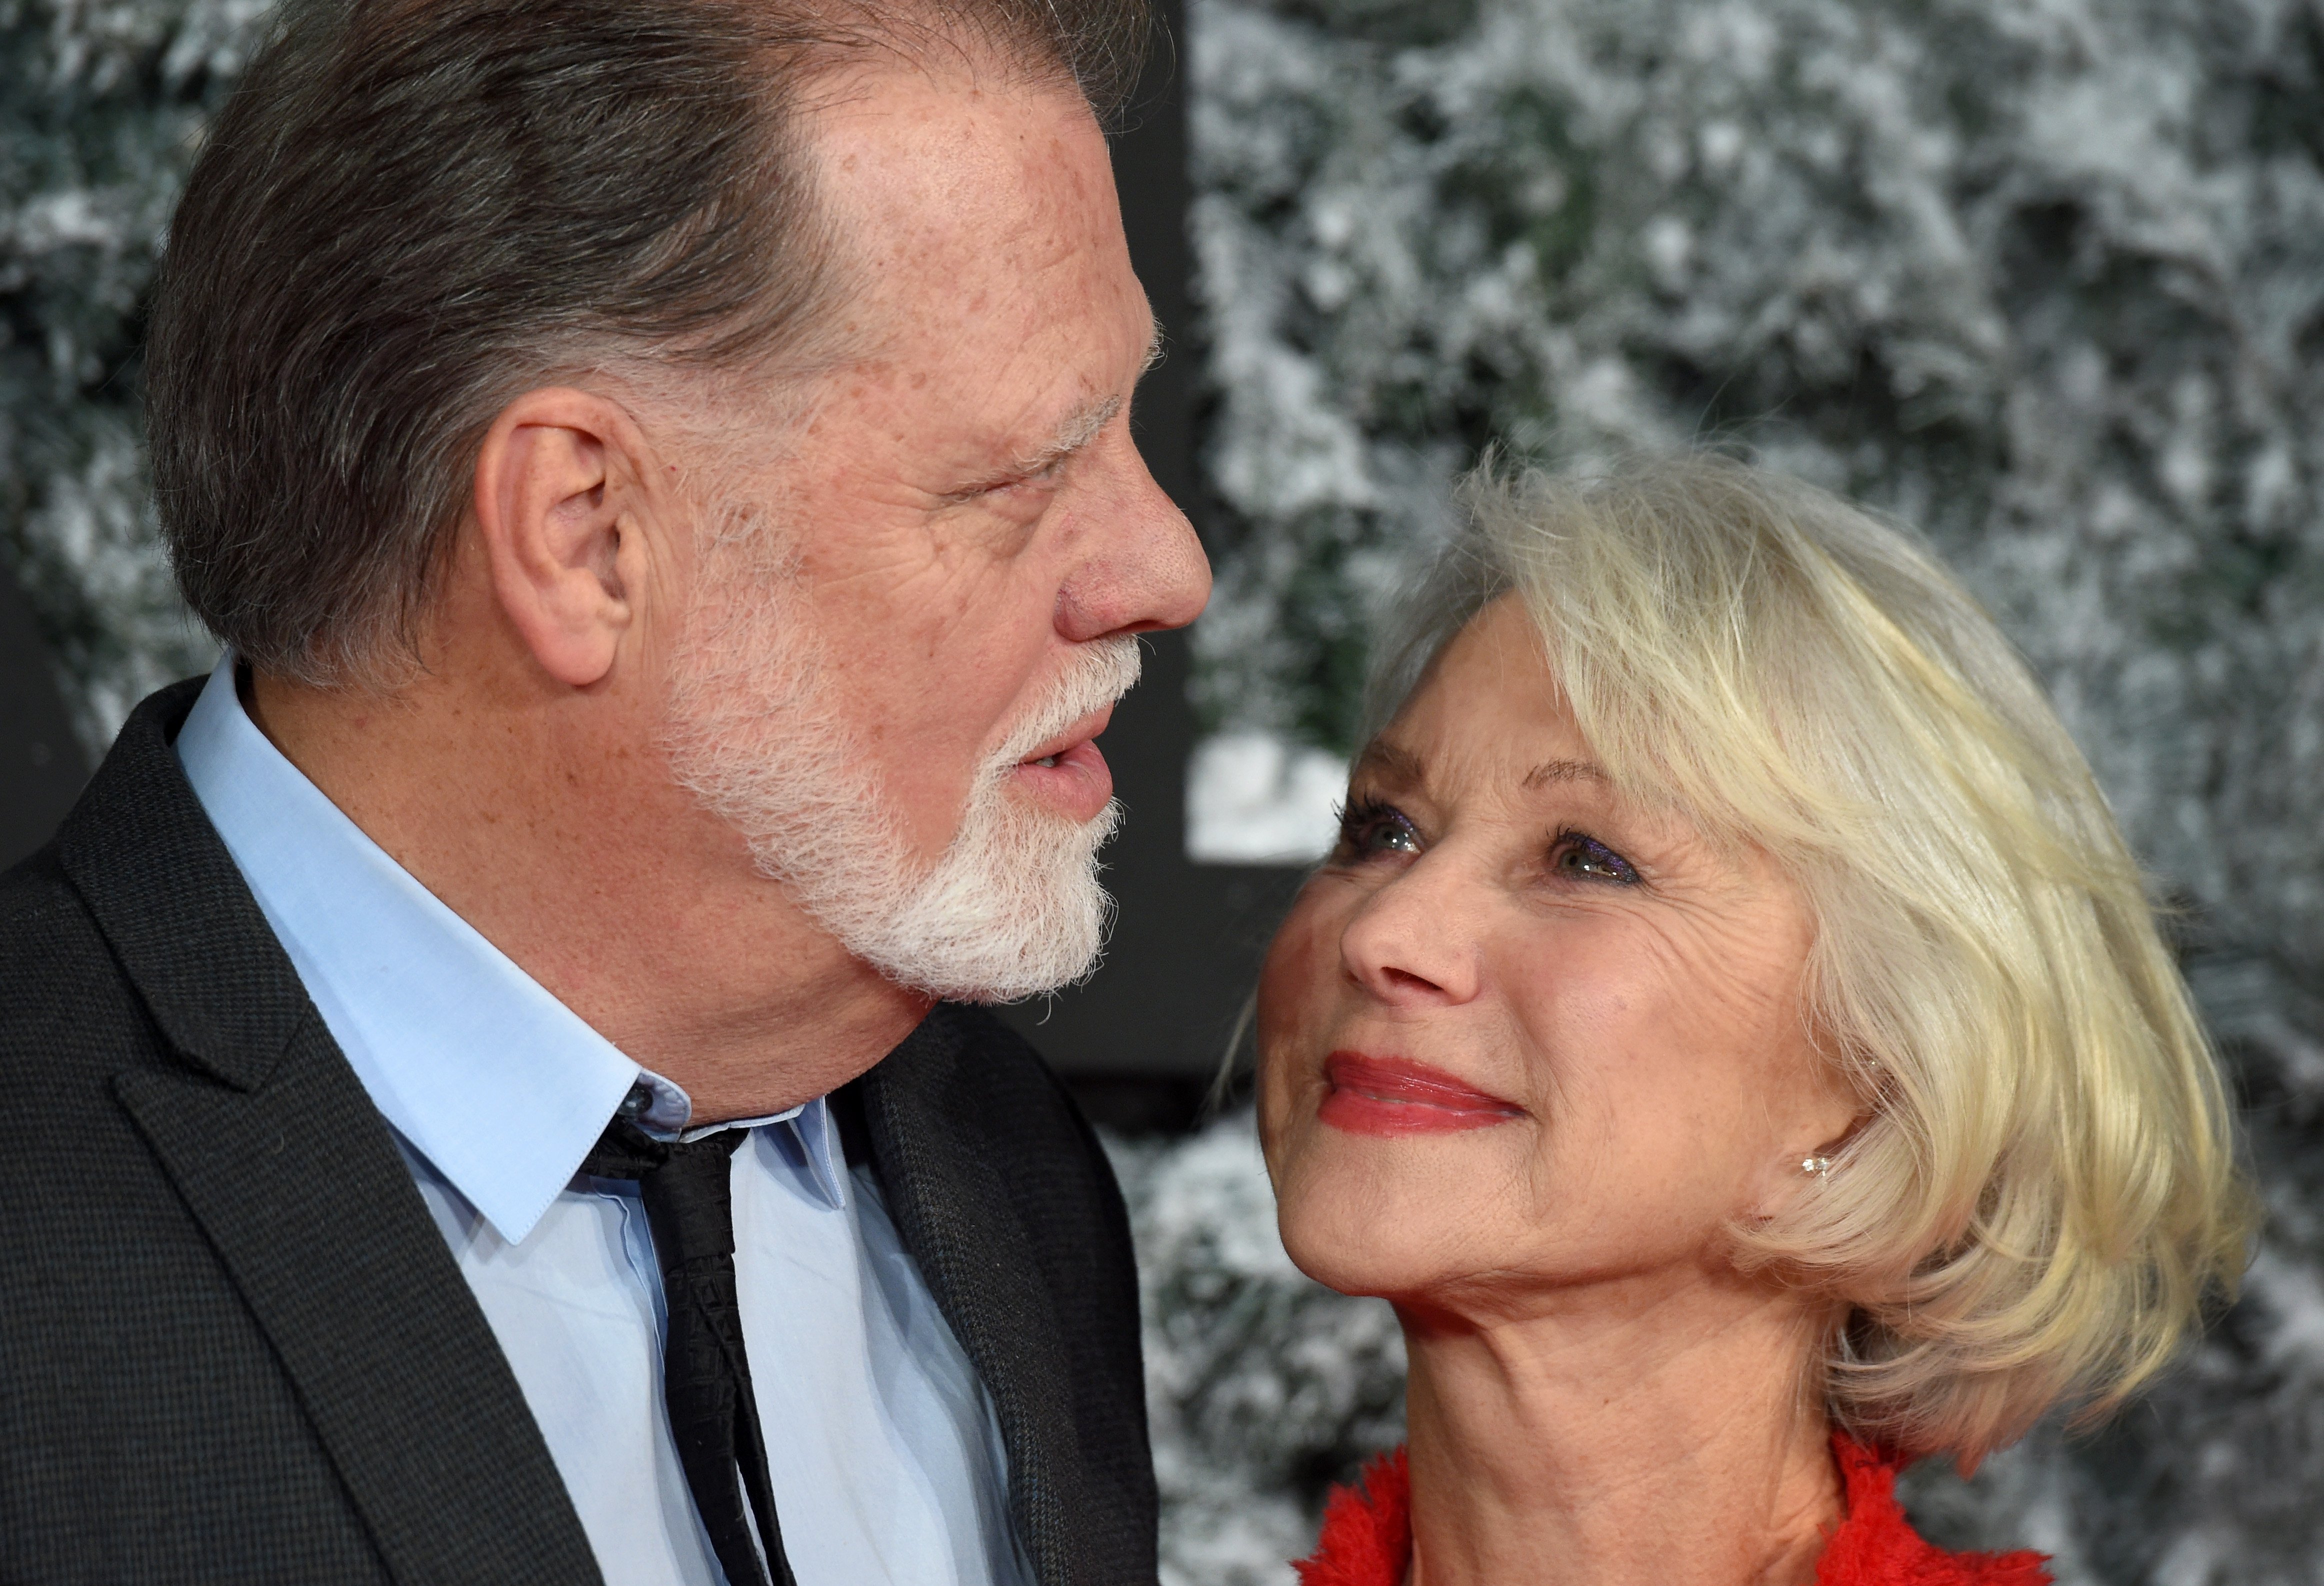 Helen Mirren and Taylor Hackford at the European premiere of "Collateral Beauty" on December 15, 2016, in London, England. | Source: Getty Images